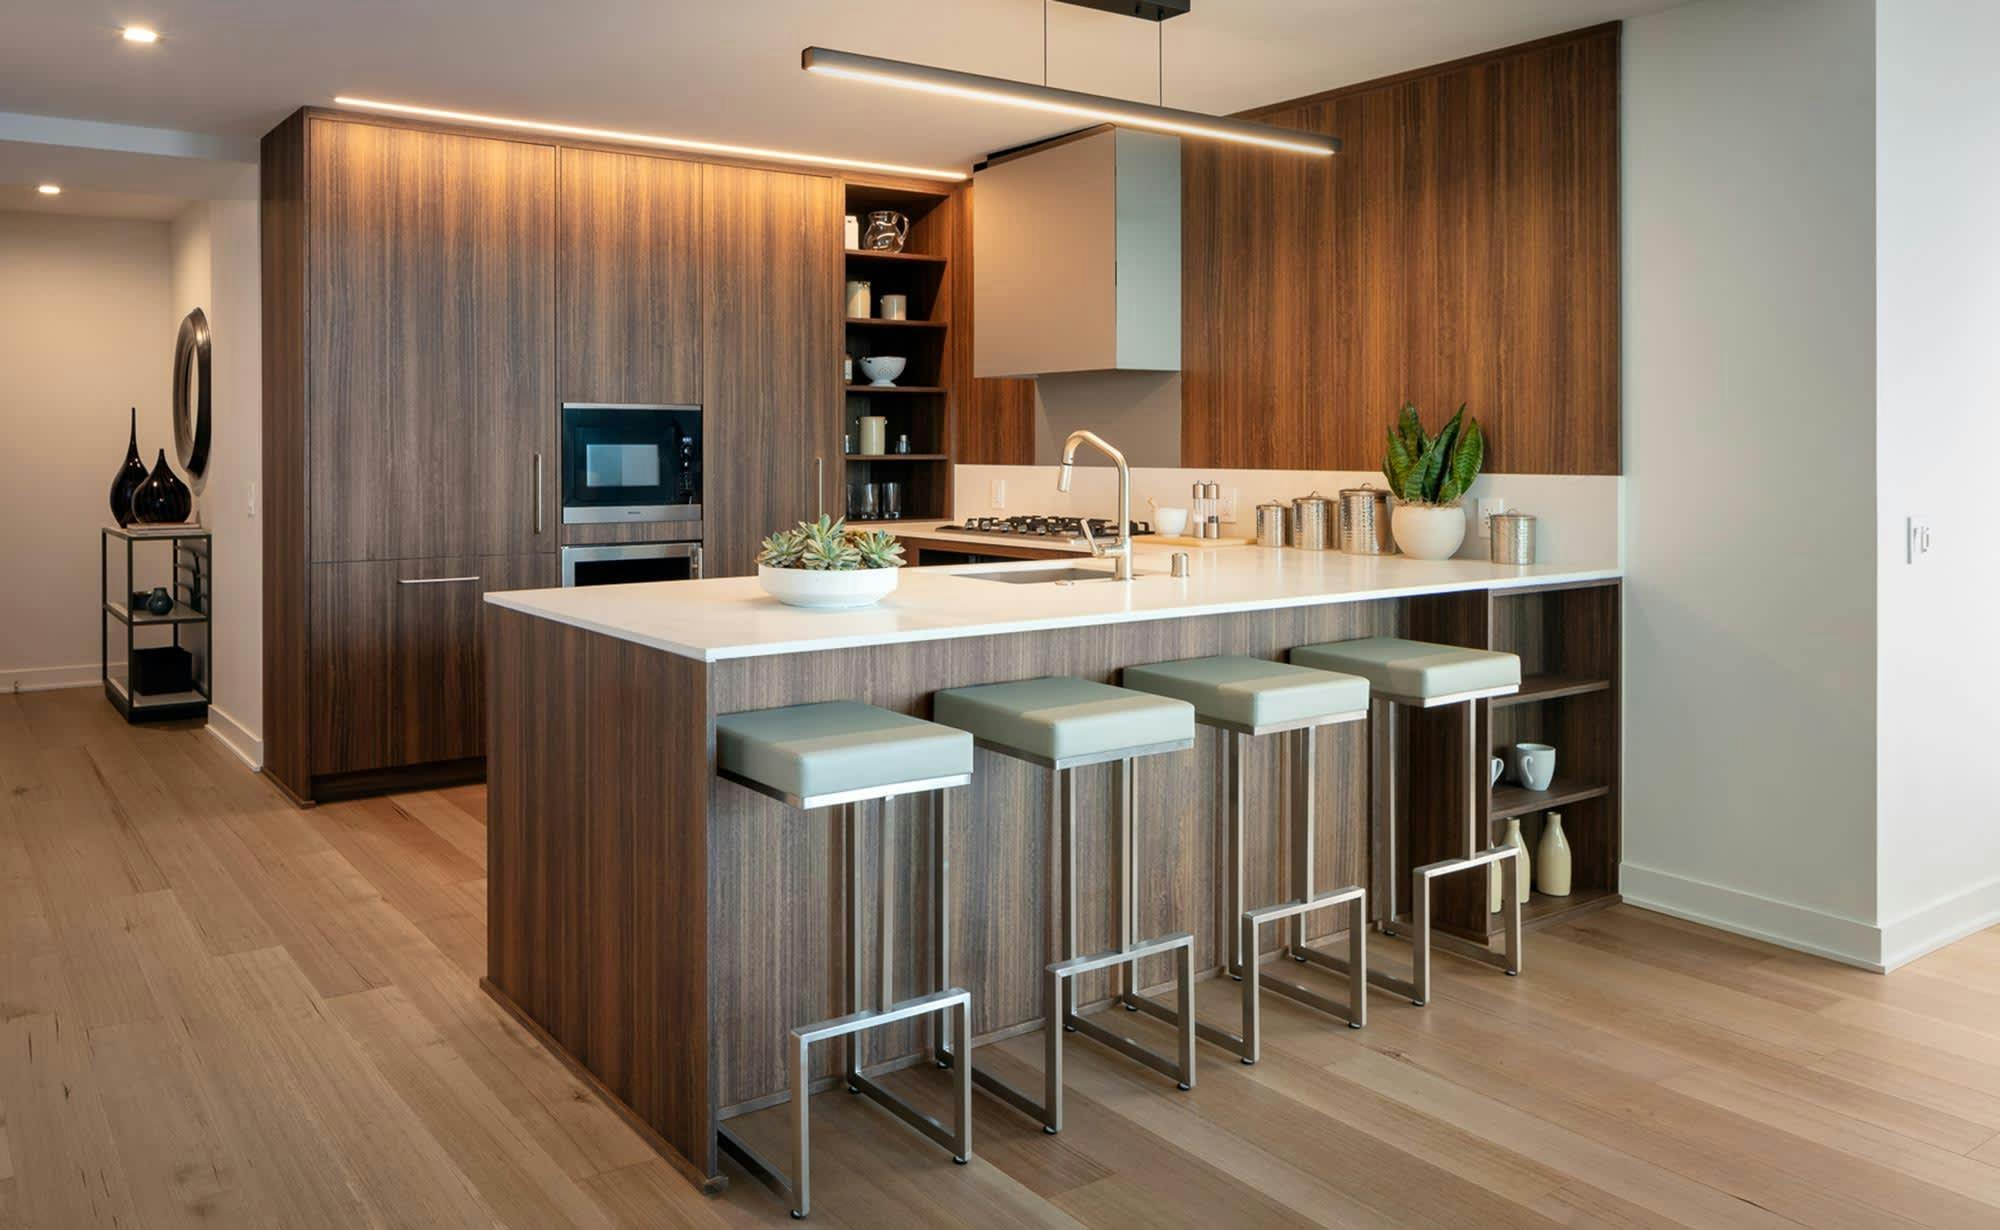 The kitchen in a MIRA residence looks clean and innovative in design, with ivory-colored Caesarstone countertops, custom cabinetry, and plenty of pantry and island storage. Photo courtesy of the MIRA website. 